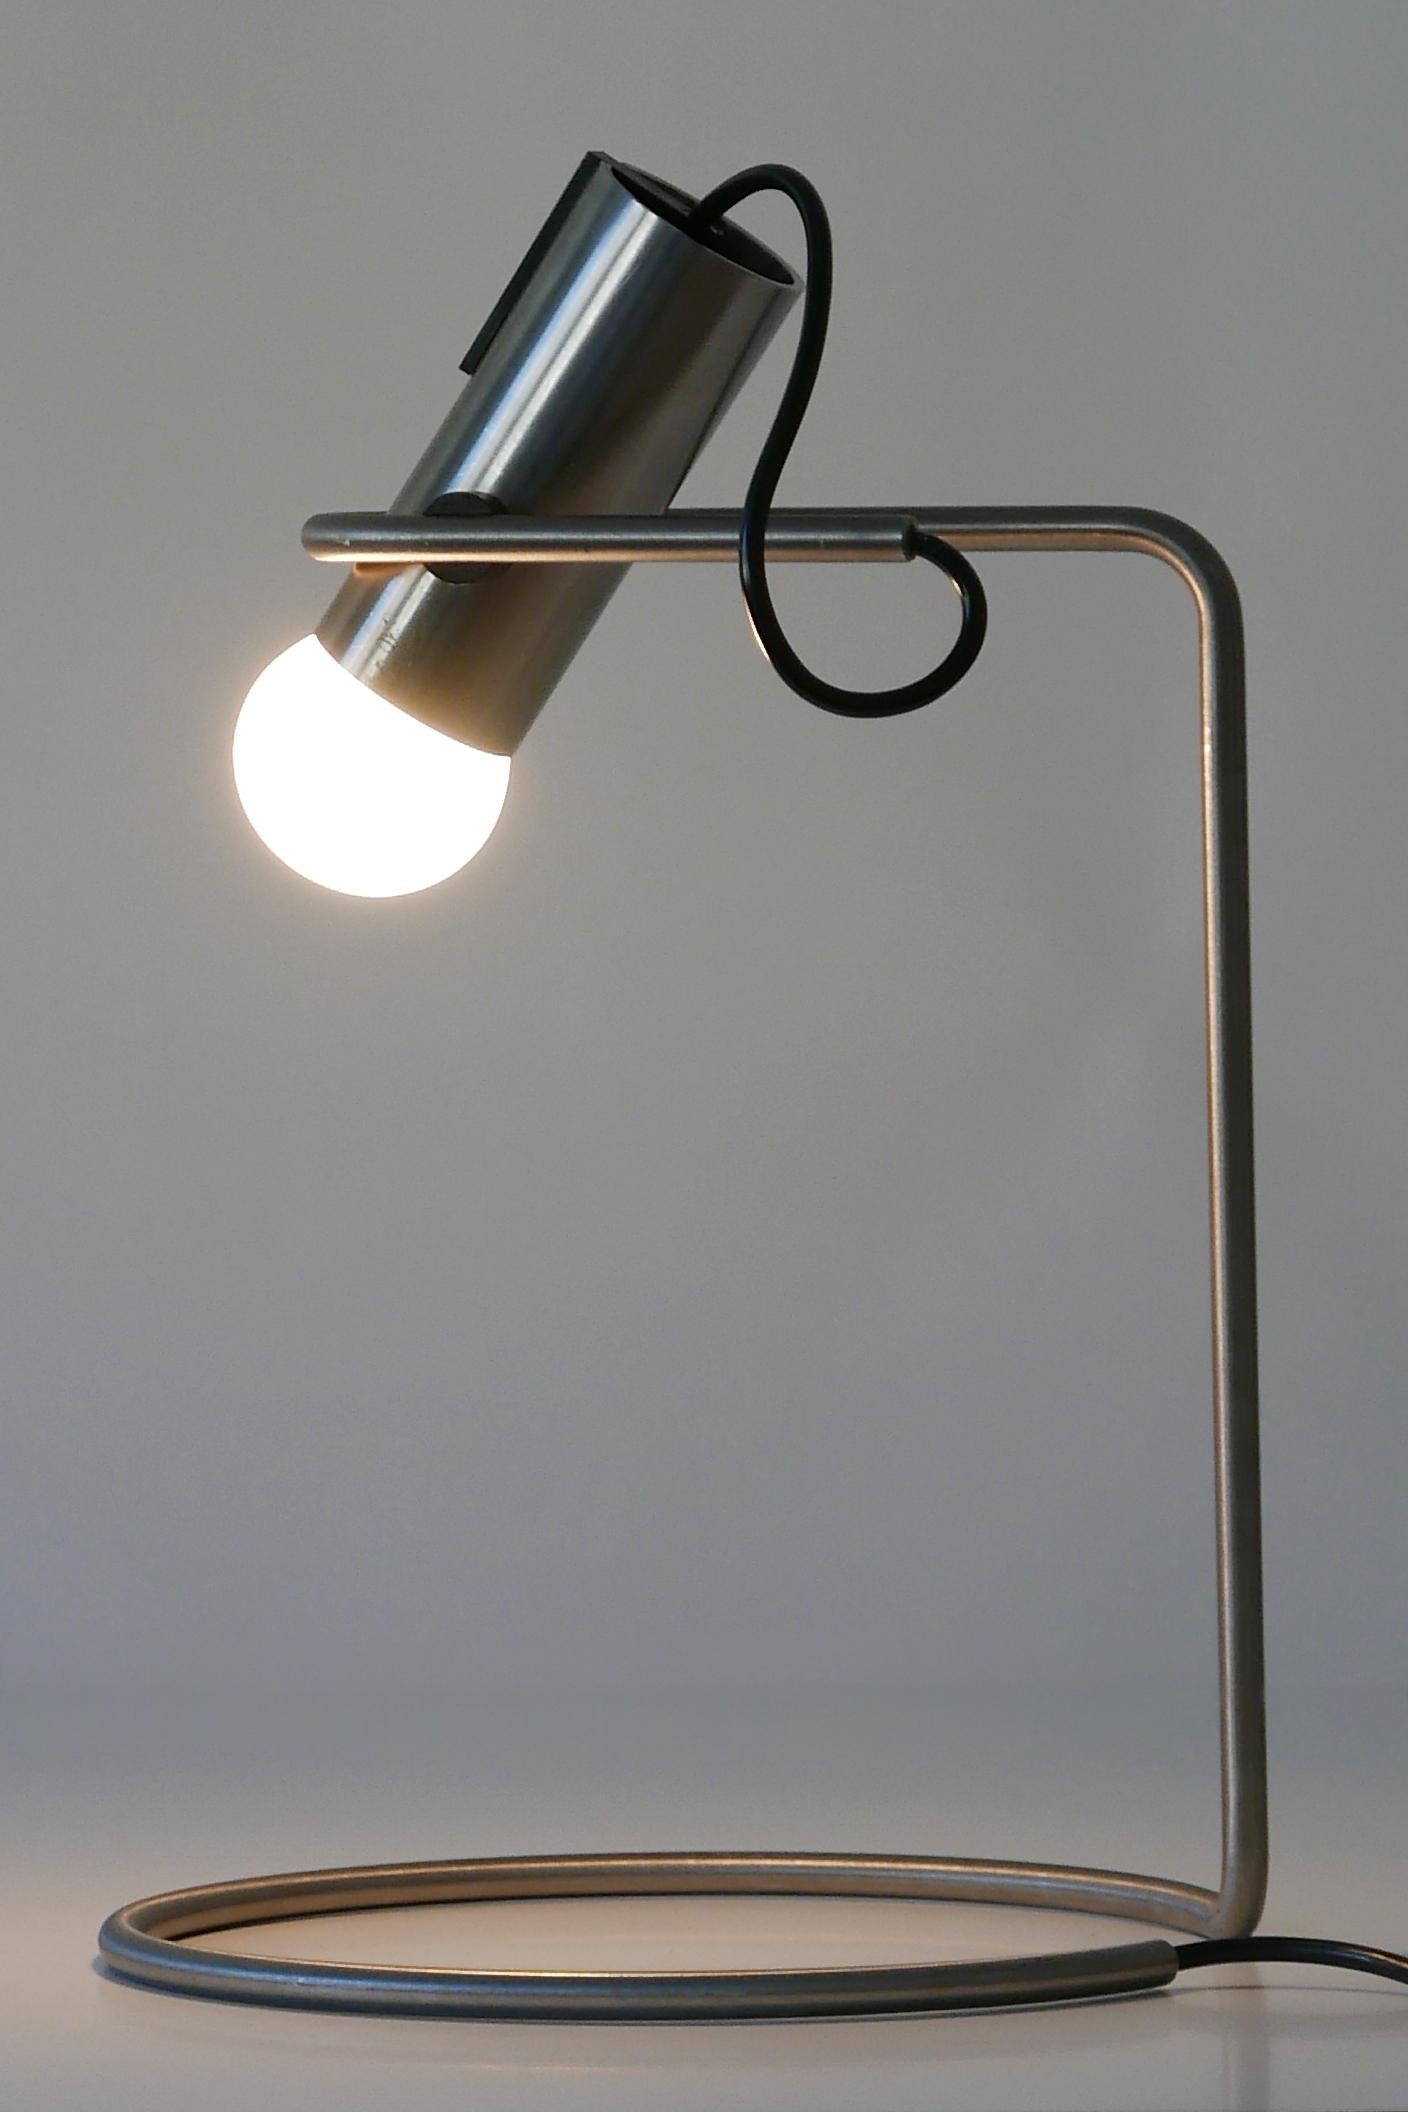 Extremely rare, minimalistic Mid-Century Modern table lamp or desk light. Manufactured probably in Italy in 1960s/1970s.

Executed in steel tube and sheet, the lamp needs 1 x E27 / E26 Edison screw fit bulb, is wired and in working condition. It